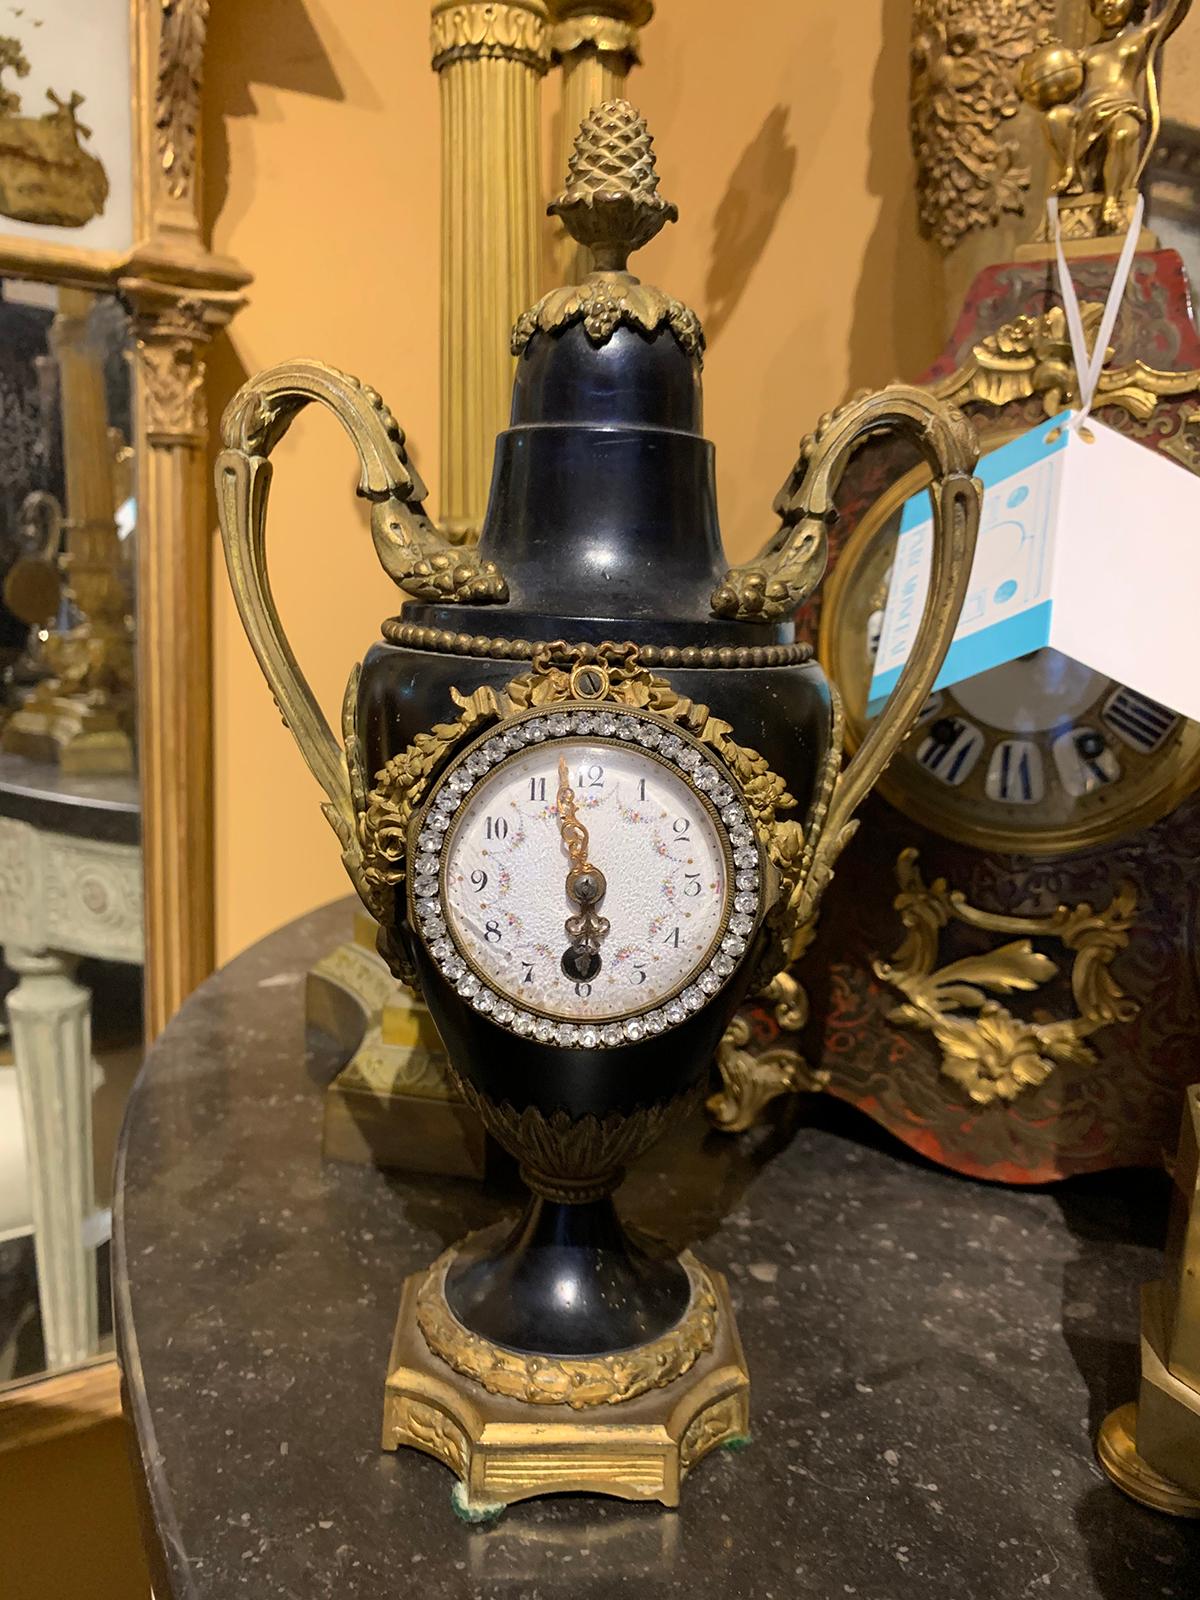 Early 20th century French bronze and tole diamonte urn form clock with wreath detail, signed JP
circa 1900.